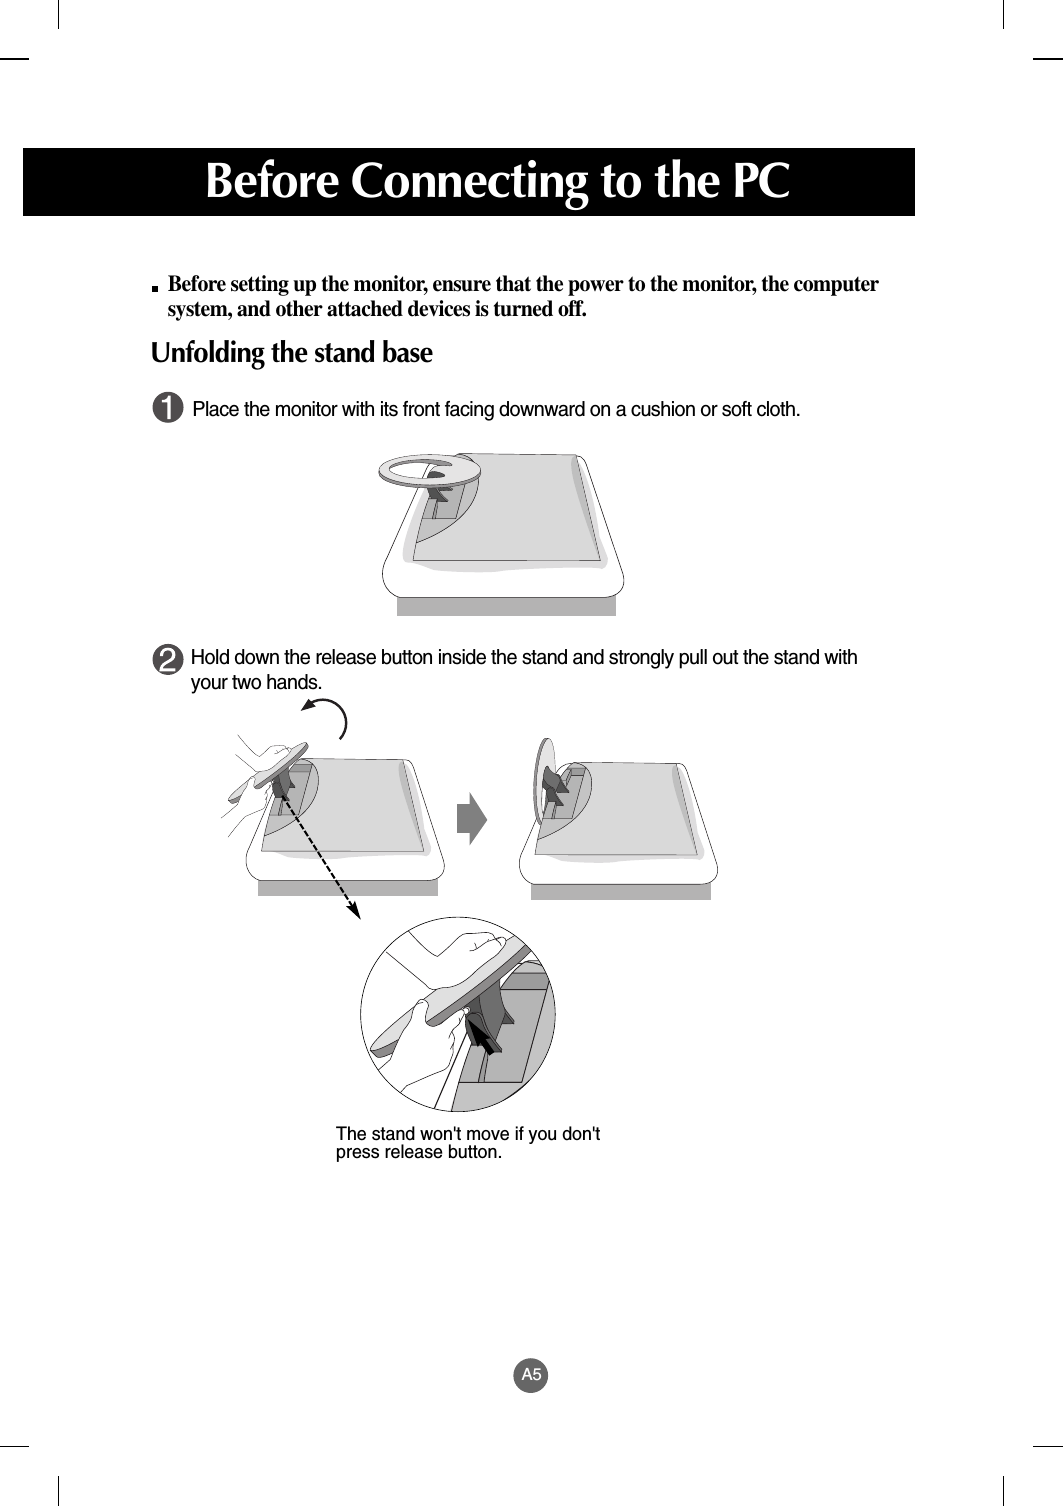 A5Before setting up the monitor, ensure that the power to the monitor, the computersystem, and other attached devices is turned off. Unfolding the stand basePlace the monitor with its front facing downward on a cushion or soft cloth. Hold down the release button inside the stand and strongly pull out the stand withyour two hands.The stand won&apos;t move if you don&apos;tpress release button.Before Connecting to the PC